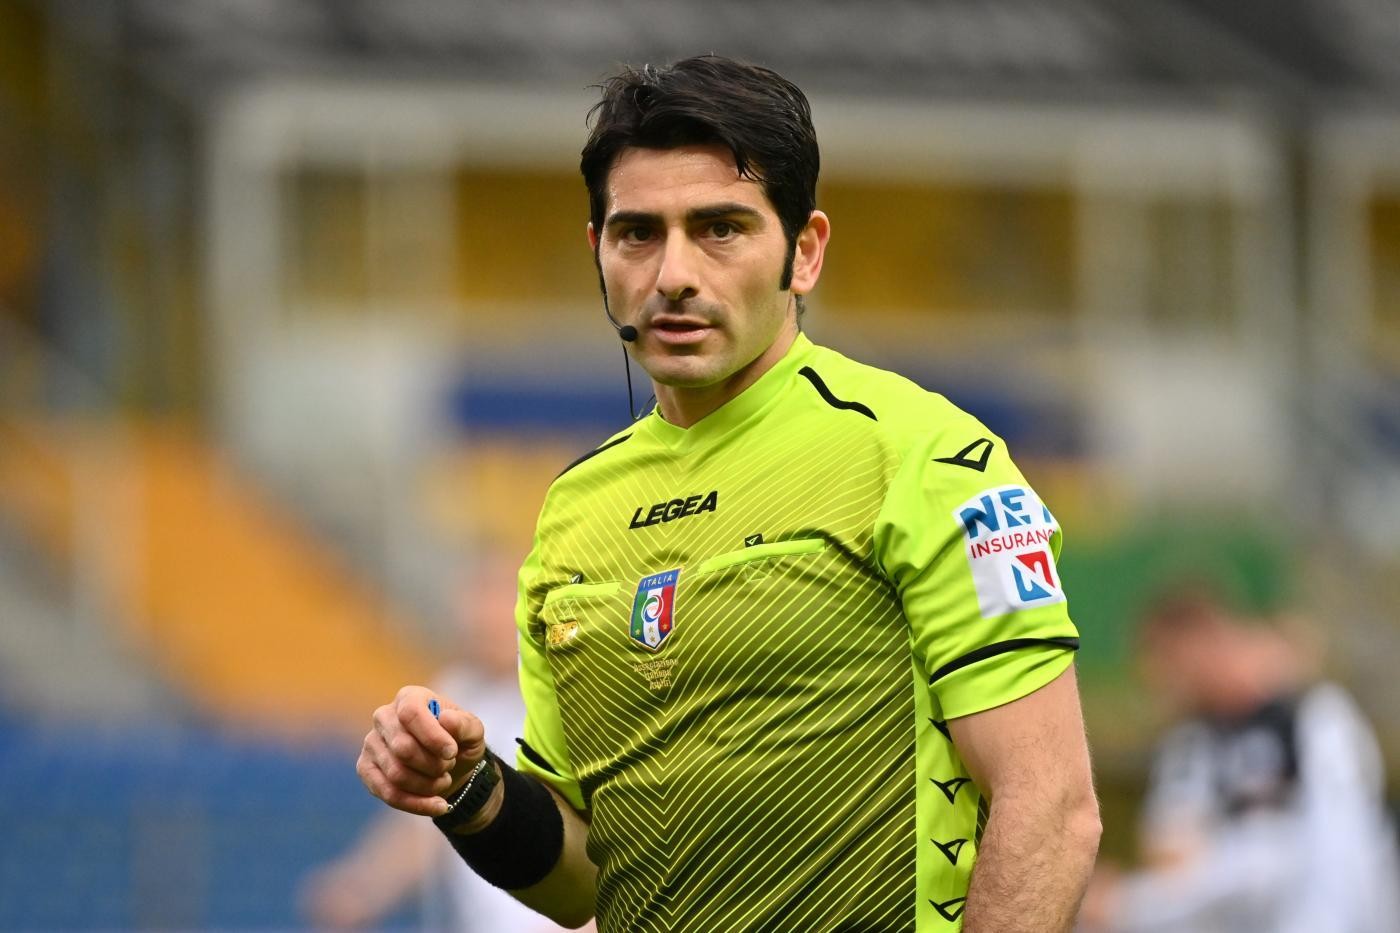 SERIE A TIM, THE REFEREES FOR THE 6TH ROUND